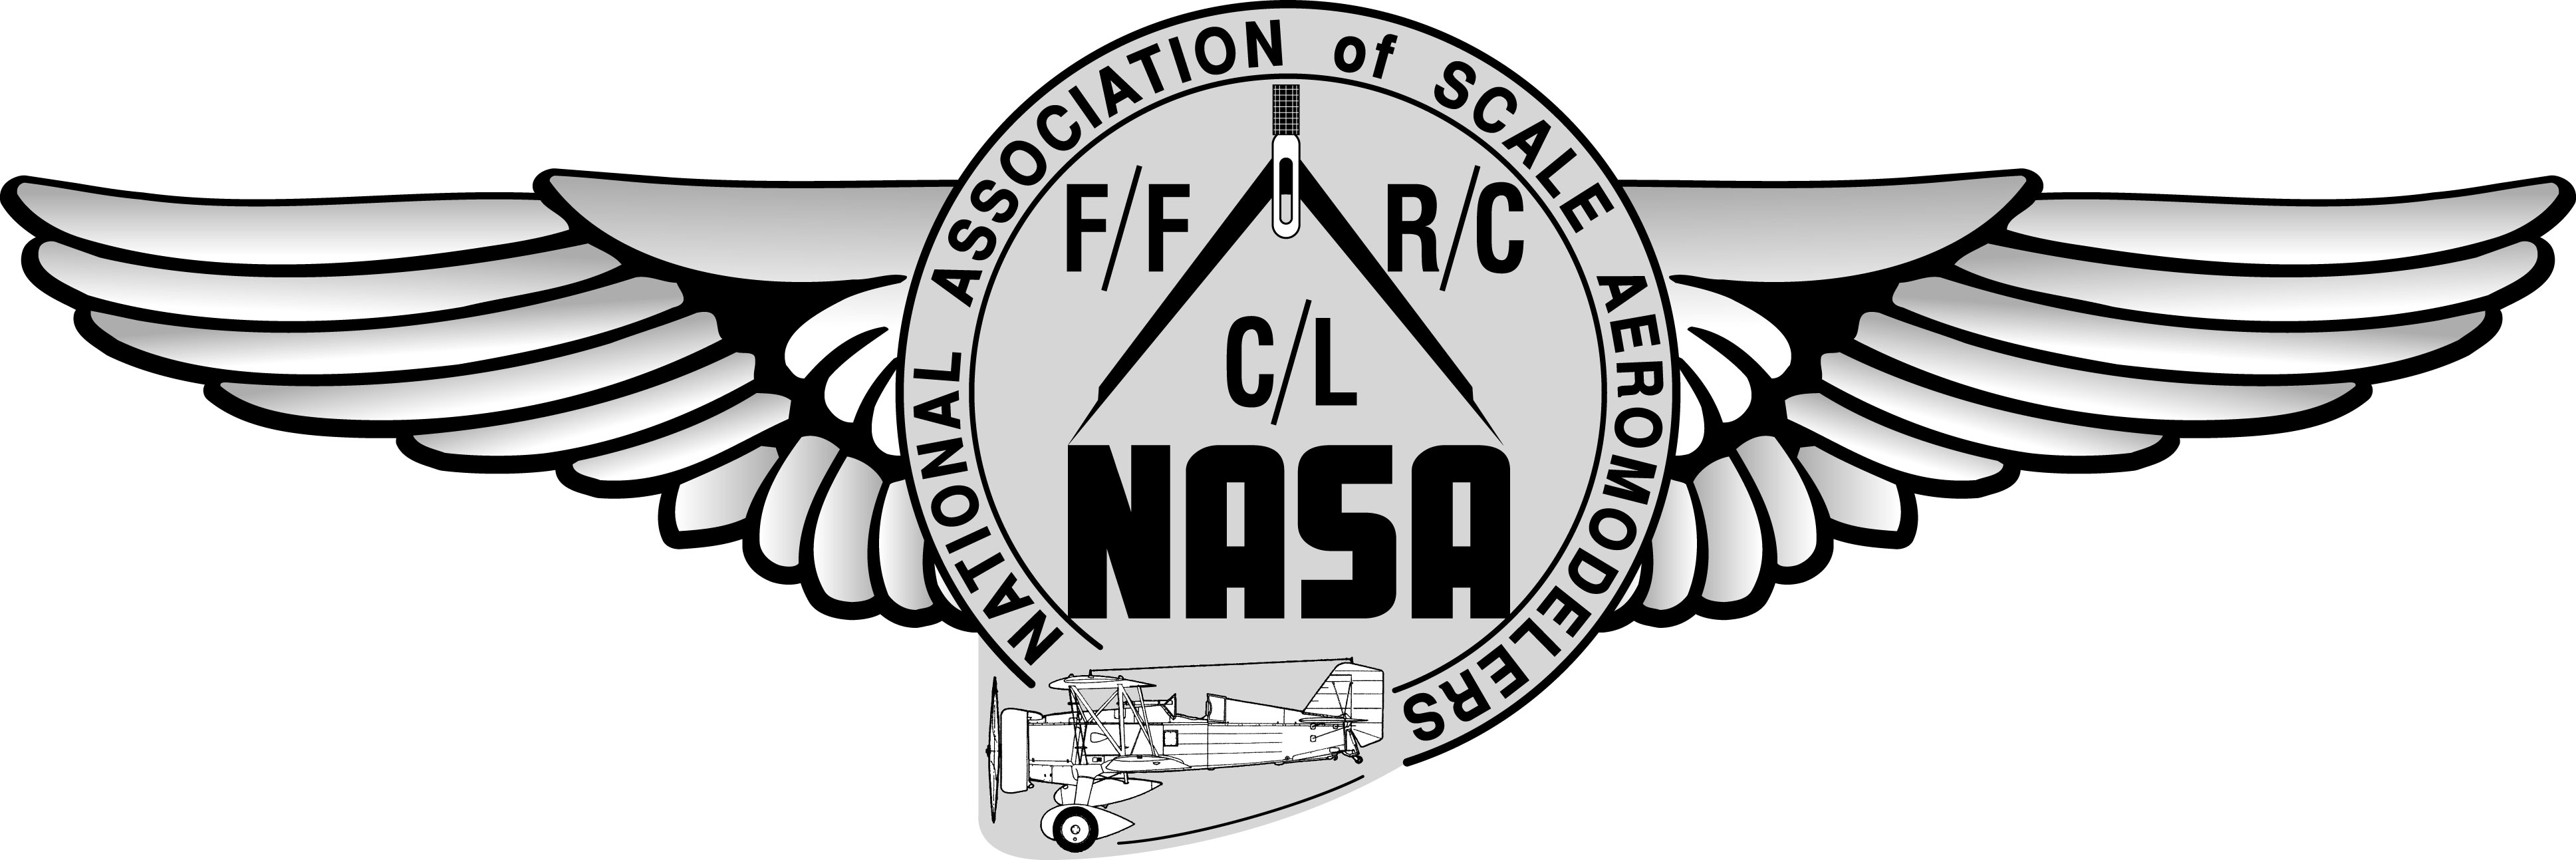 Nasa Symbol Black And White (page 2) - Pics about space